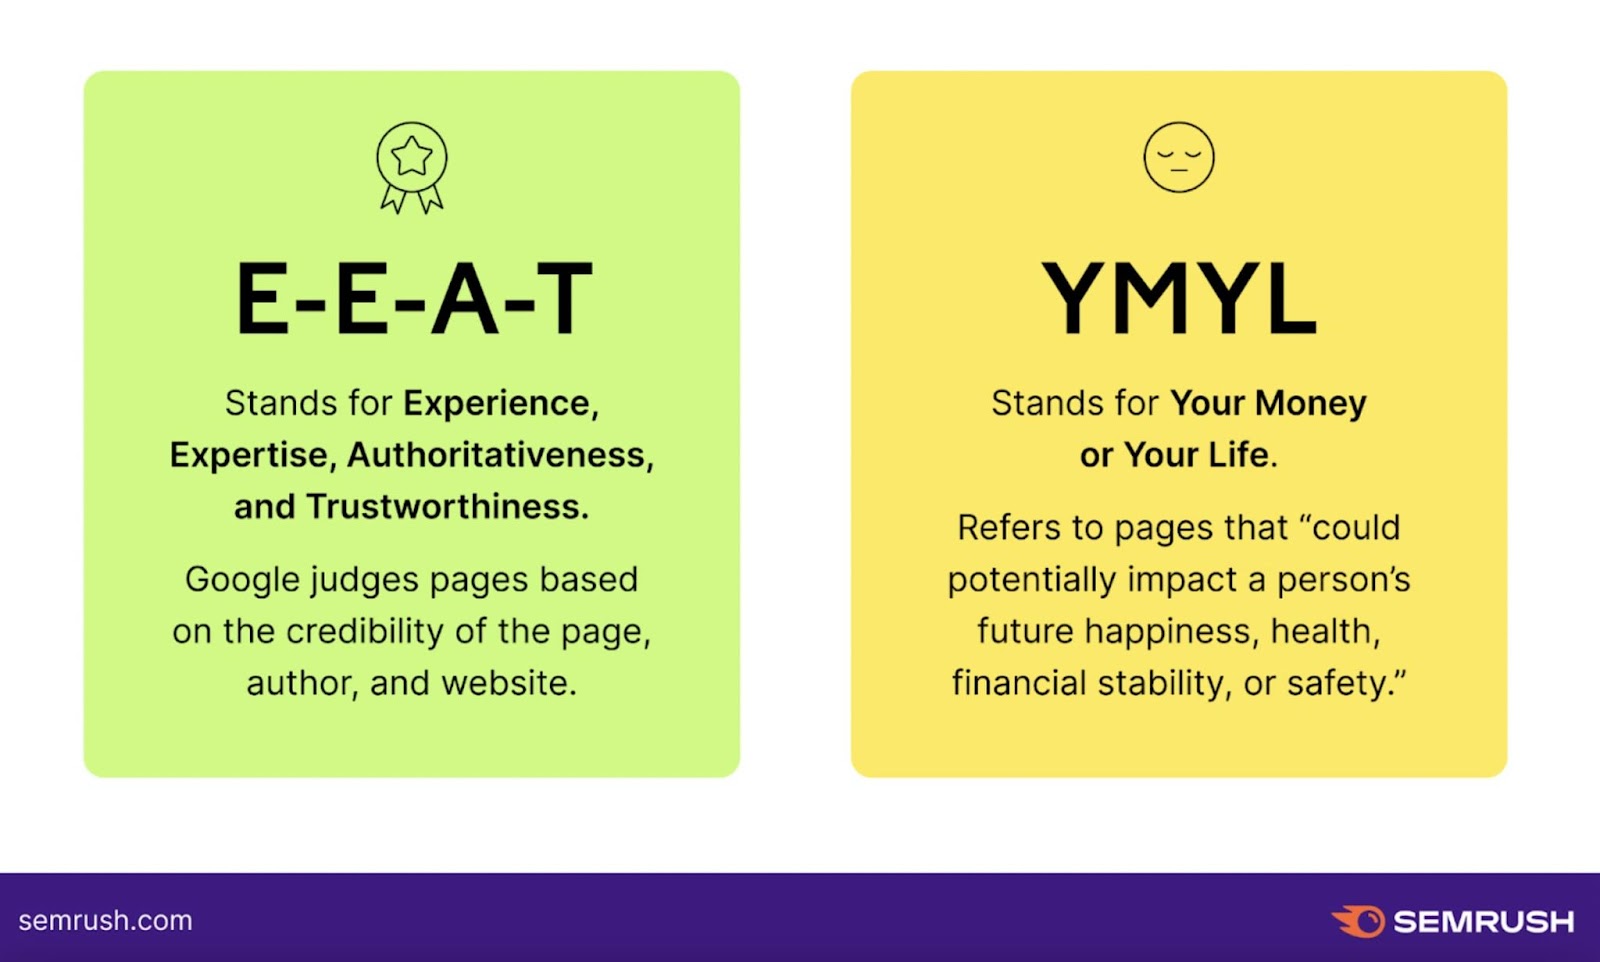 A visual explaining what "E-E-A-T" and "YMYL" stand for